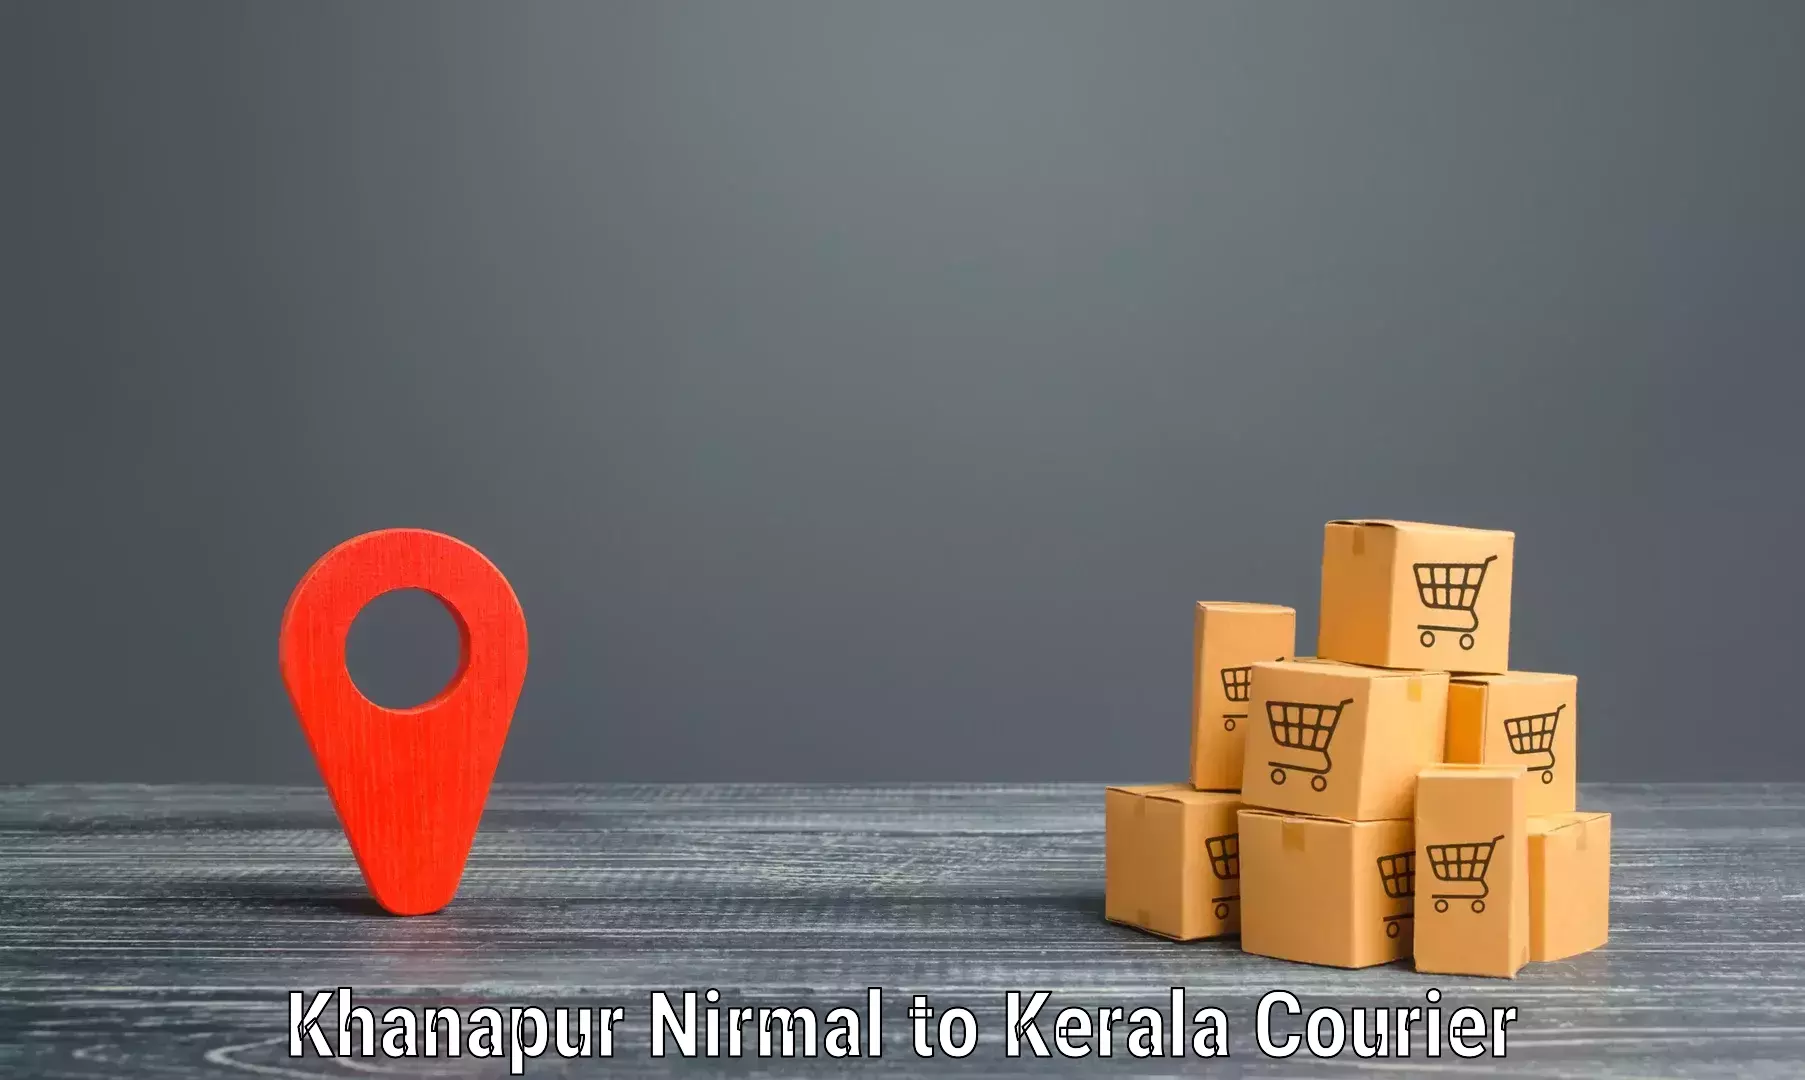 Tailored delivery services Khanapur Nirmal to Kozhikode